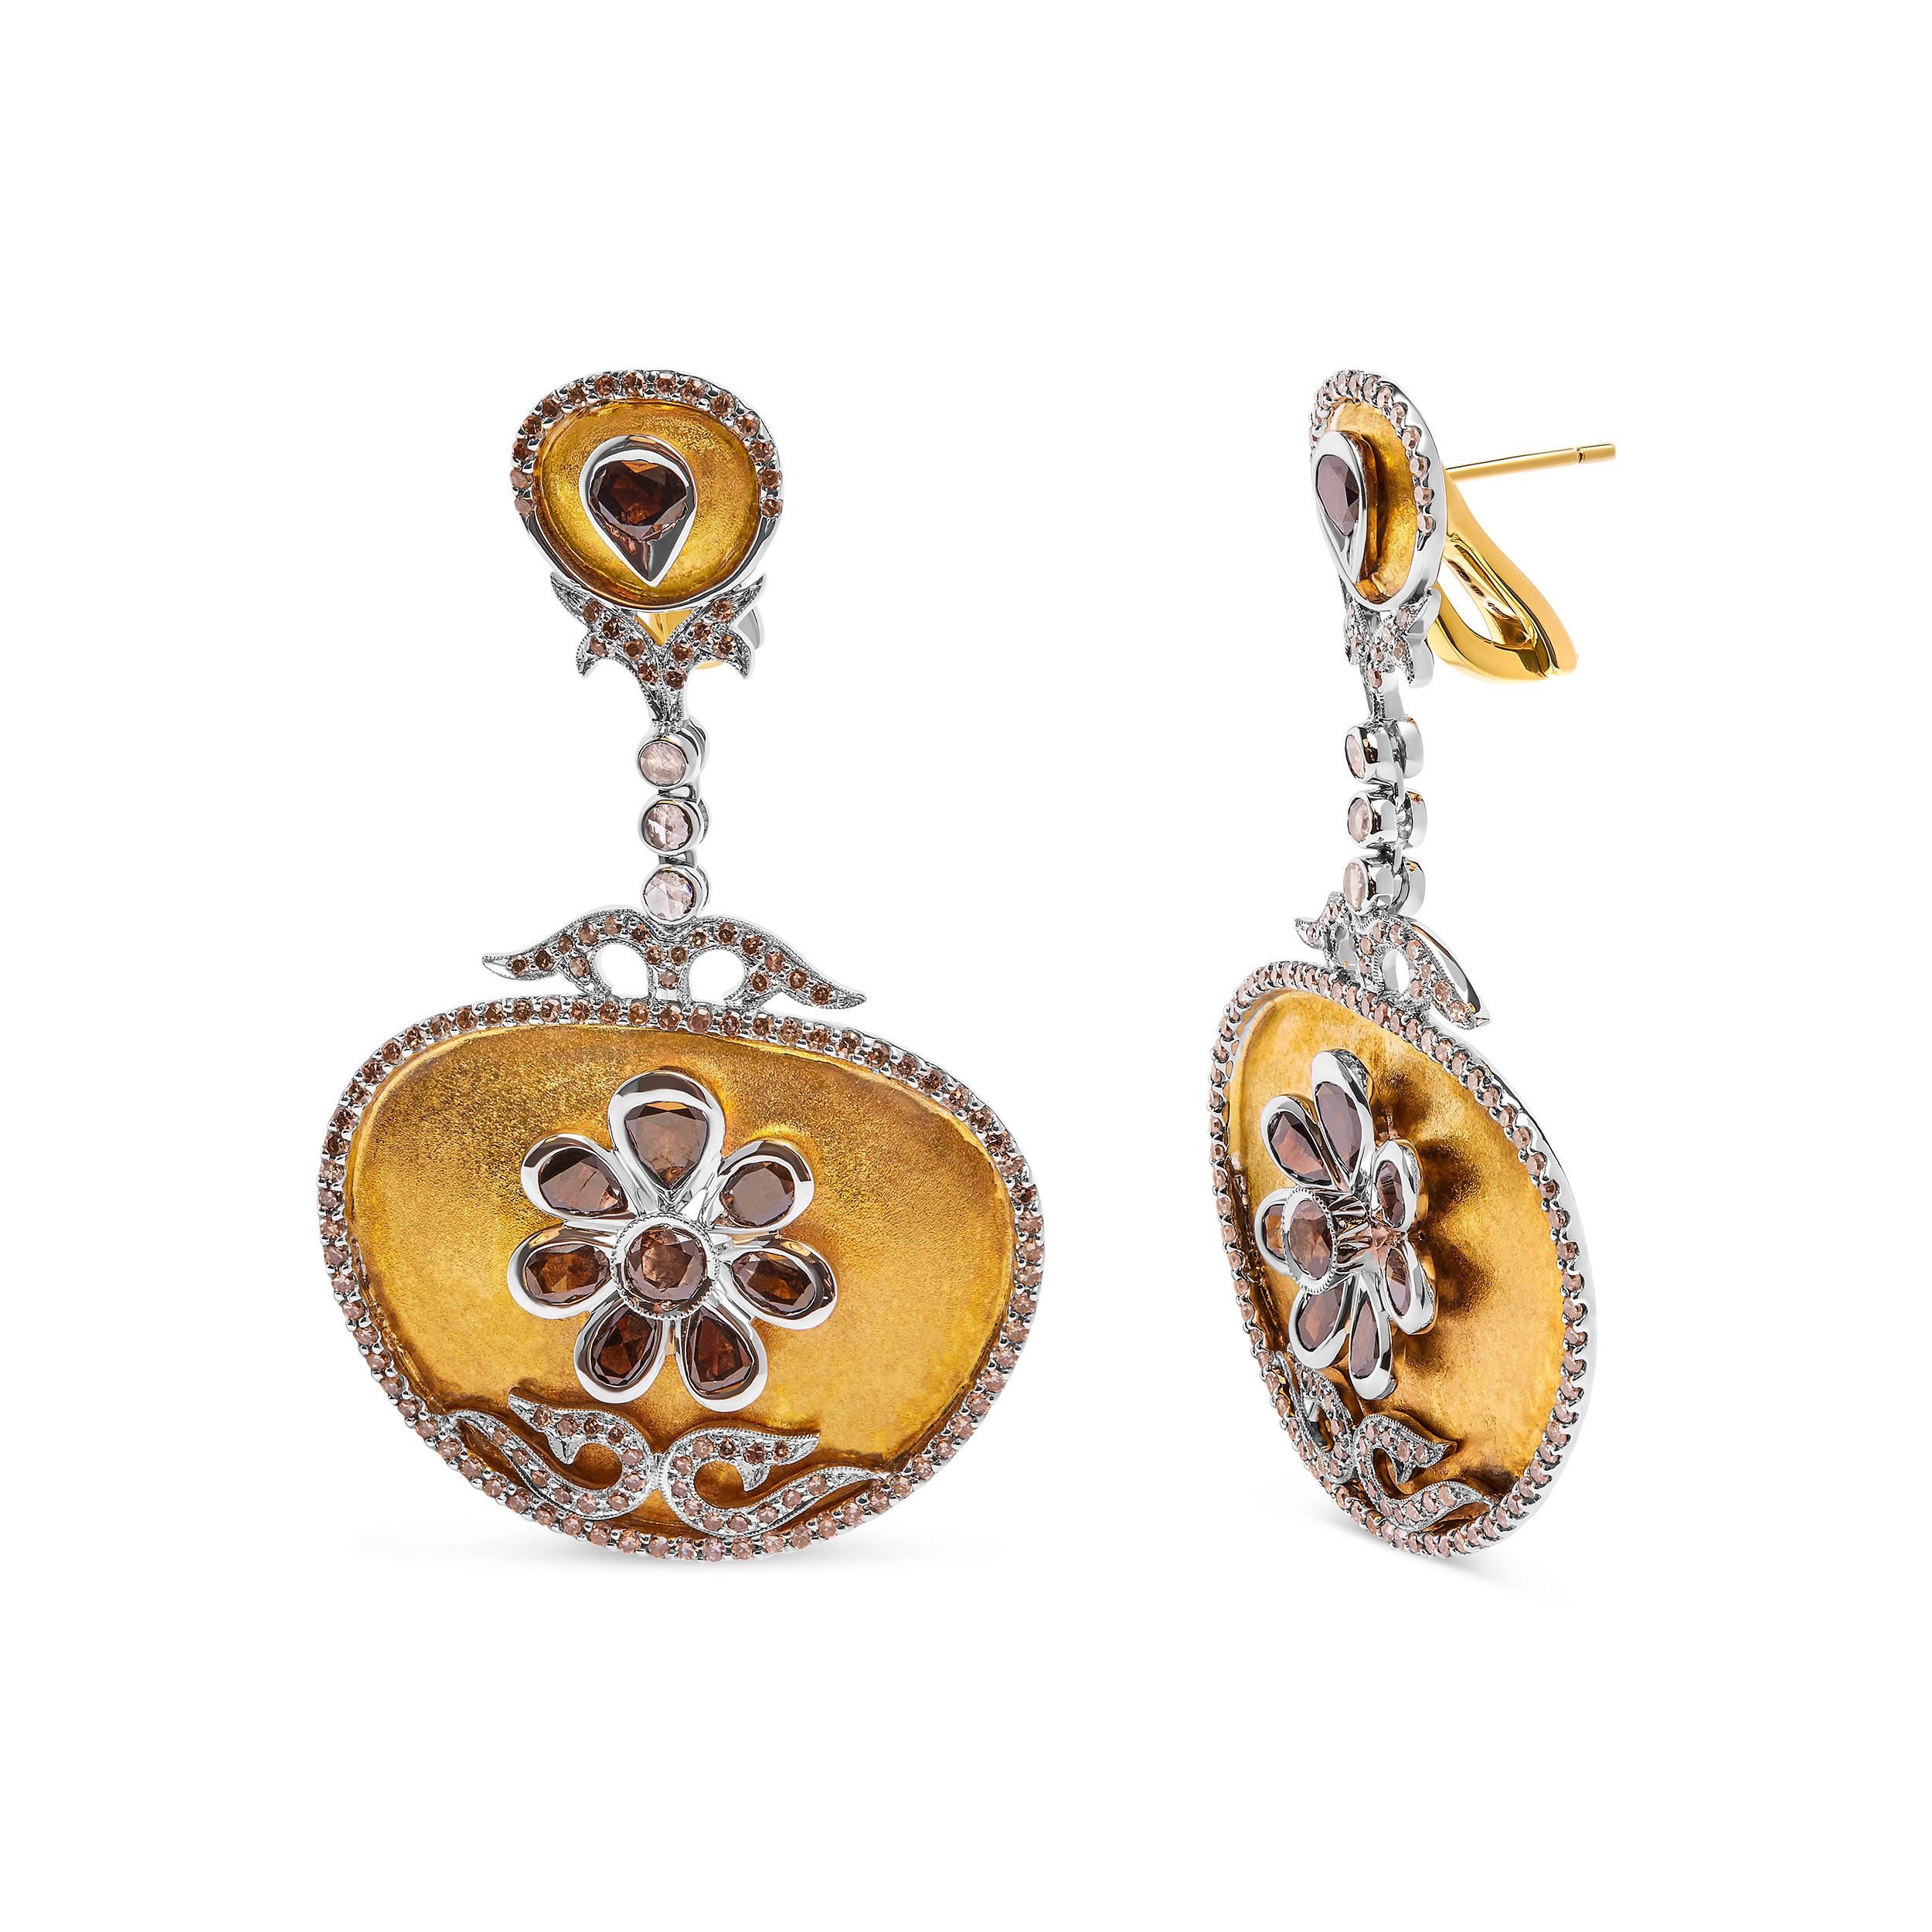 Introducing our exquisite 14K White and Yellow Gold Medallion Dangle Earrings, a true masterpiece crafted to captivate. With a remarkable 5 1/4 Cttw of Rose Cut Diamonds, these earrings exude elegance and sophistication. The 294 dazzling diamonds,